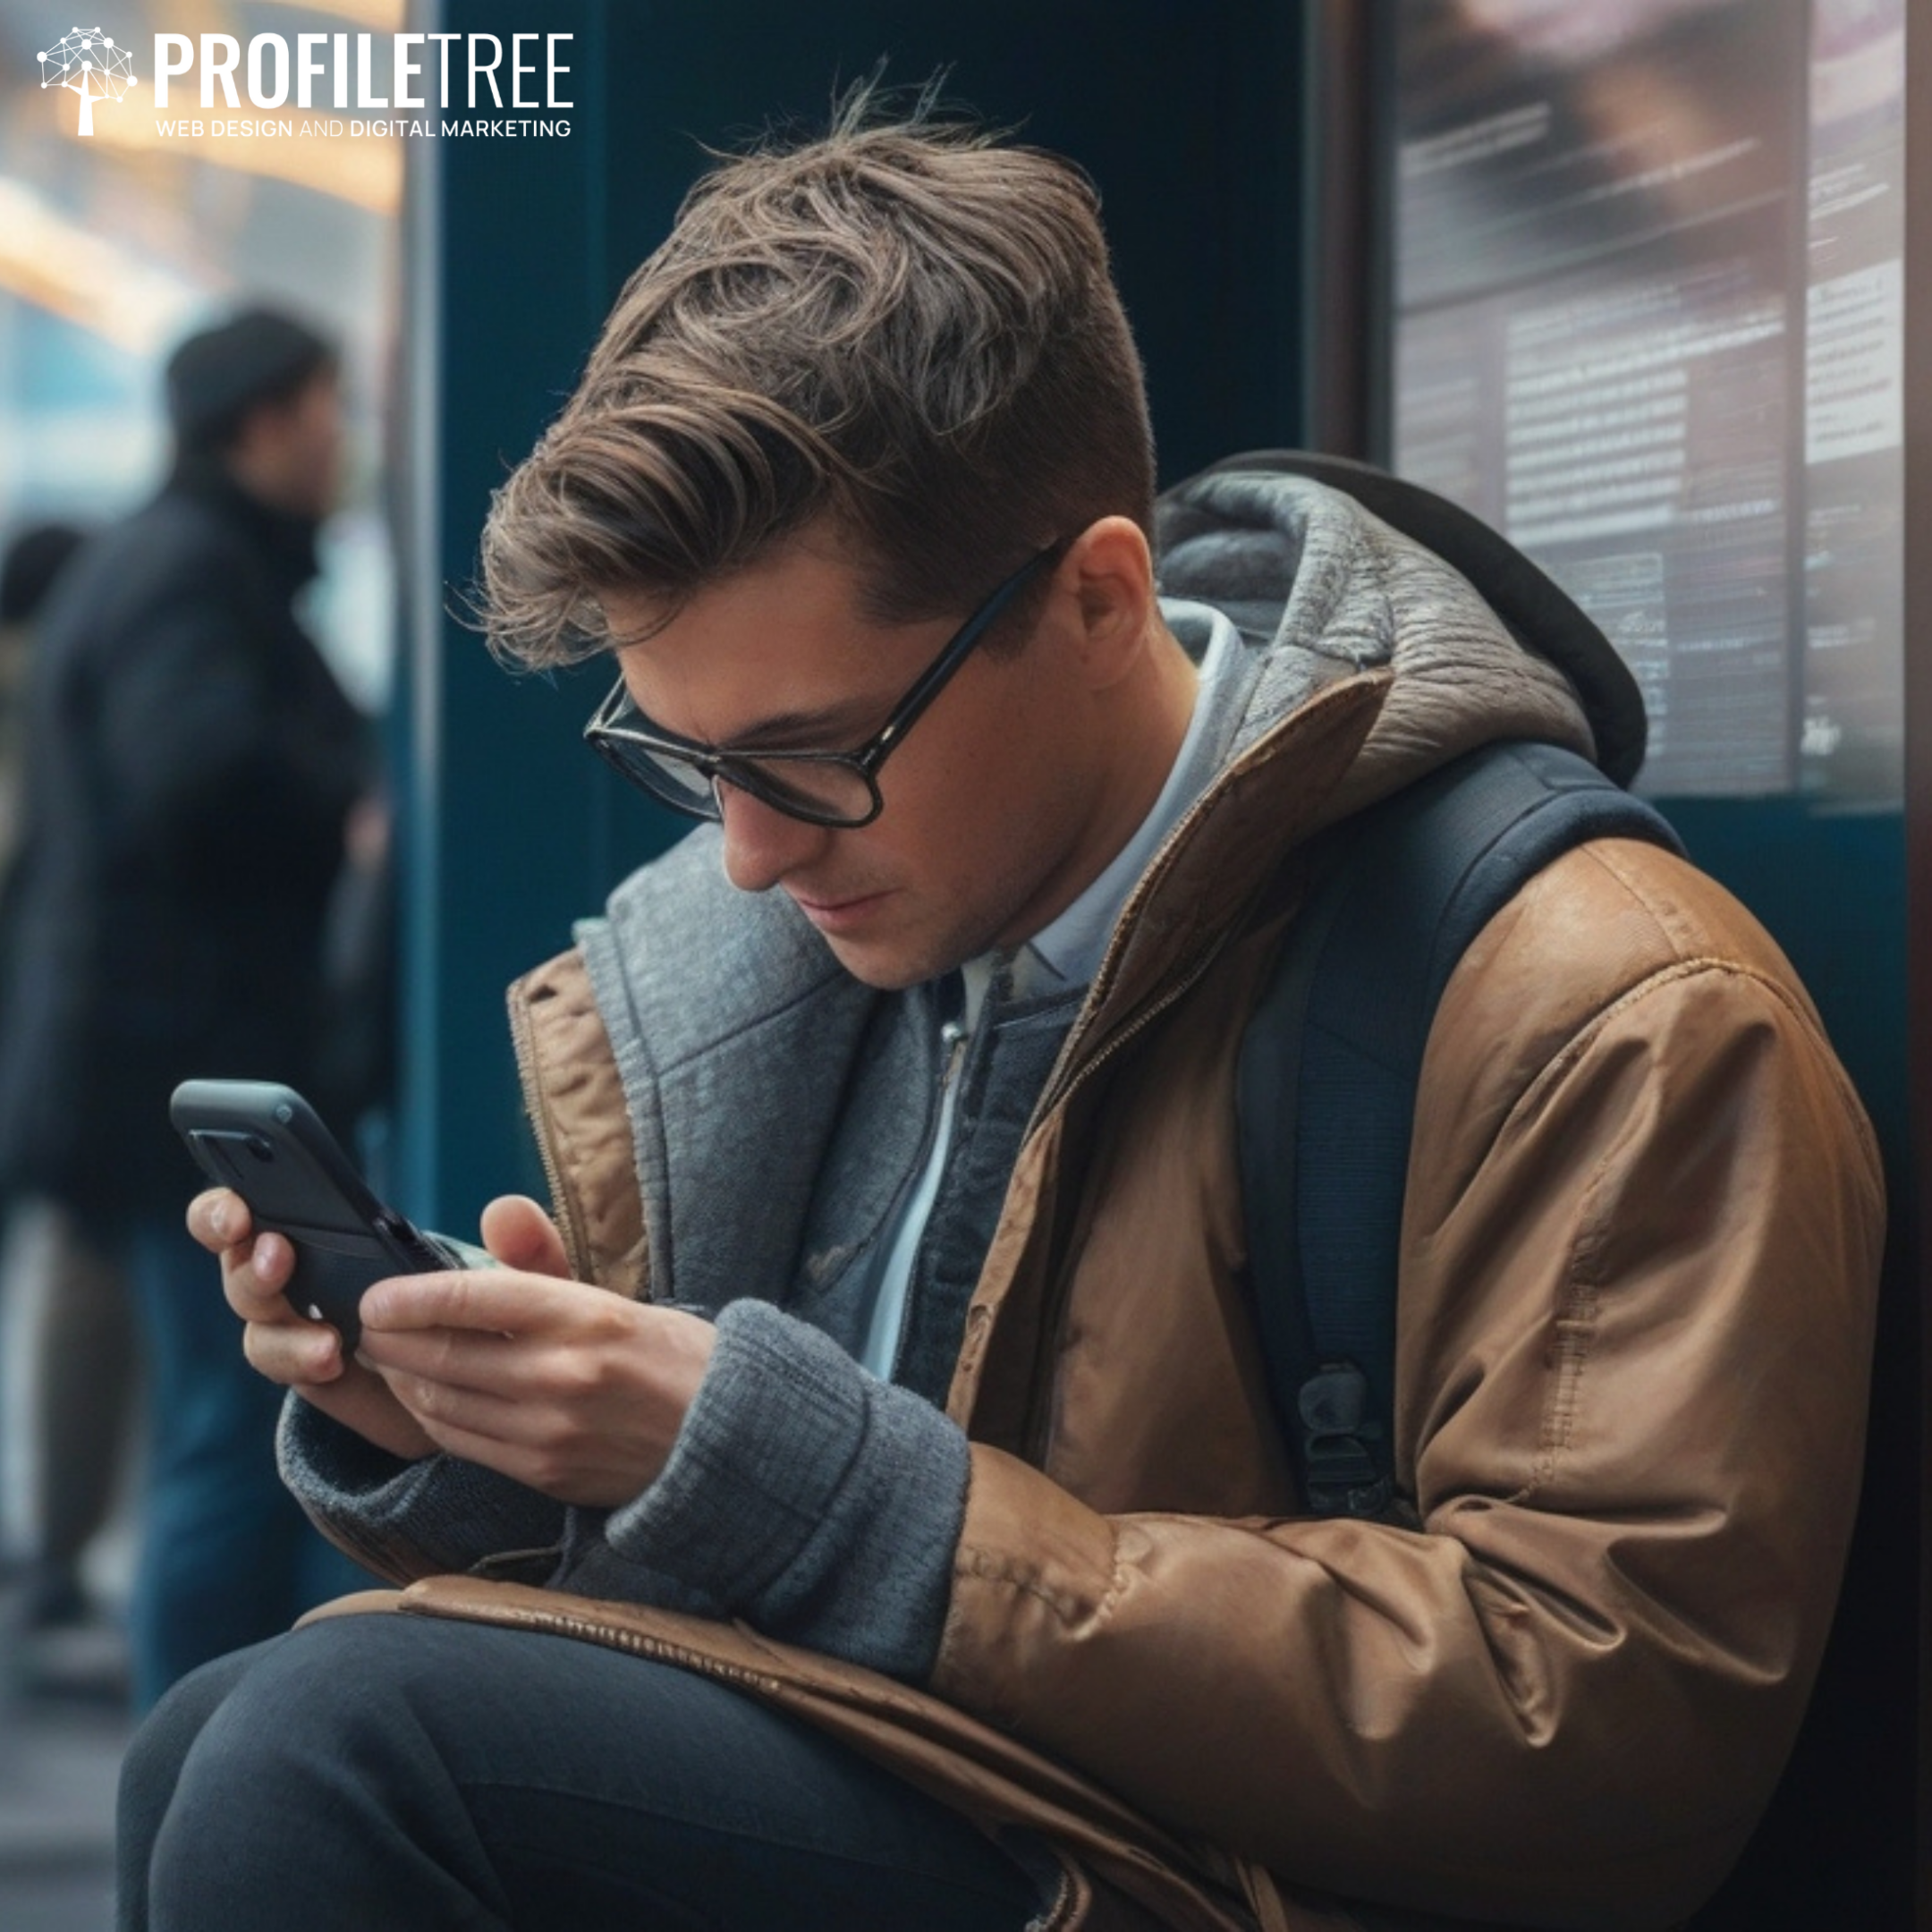 Image of person sitting looking at their phone